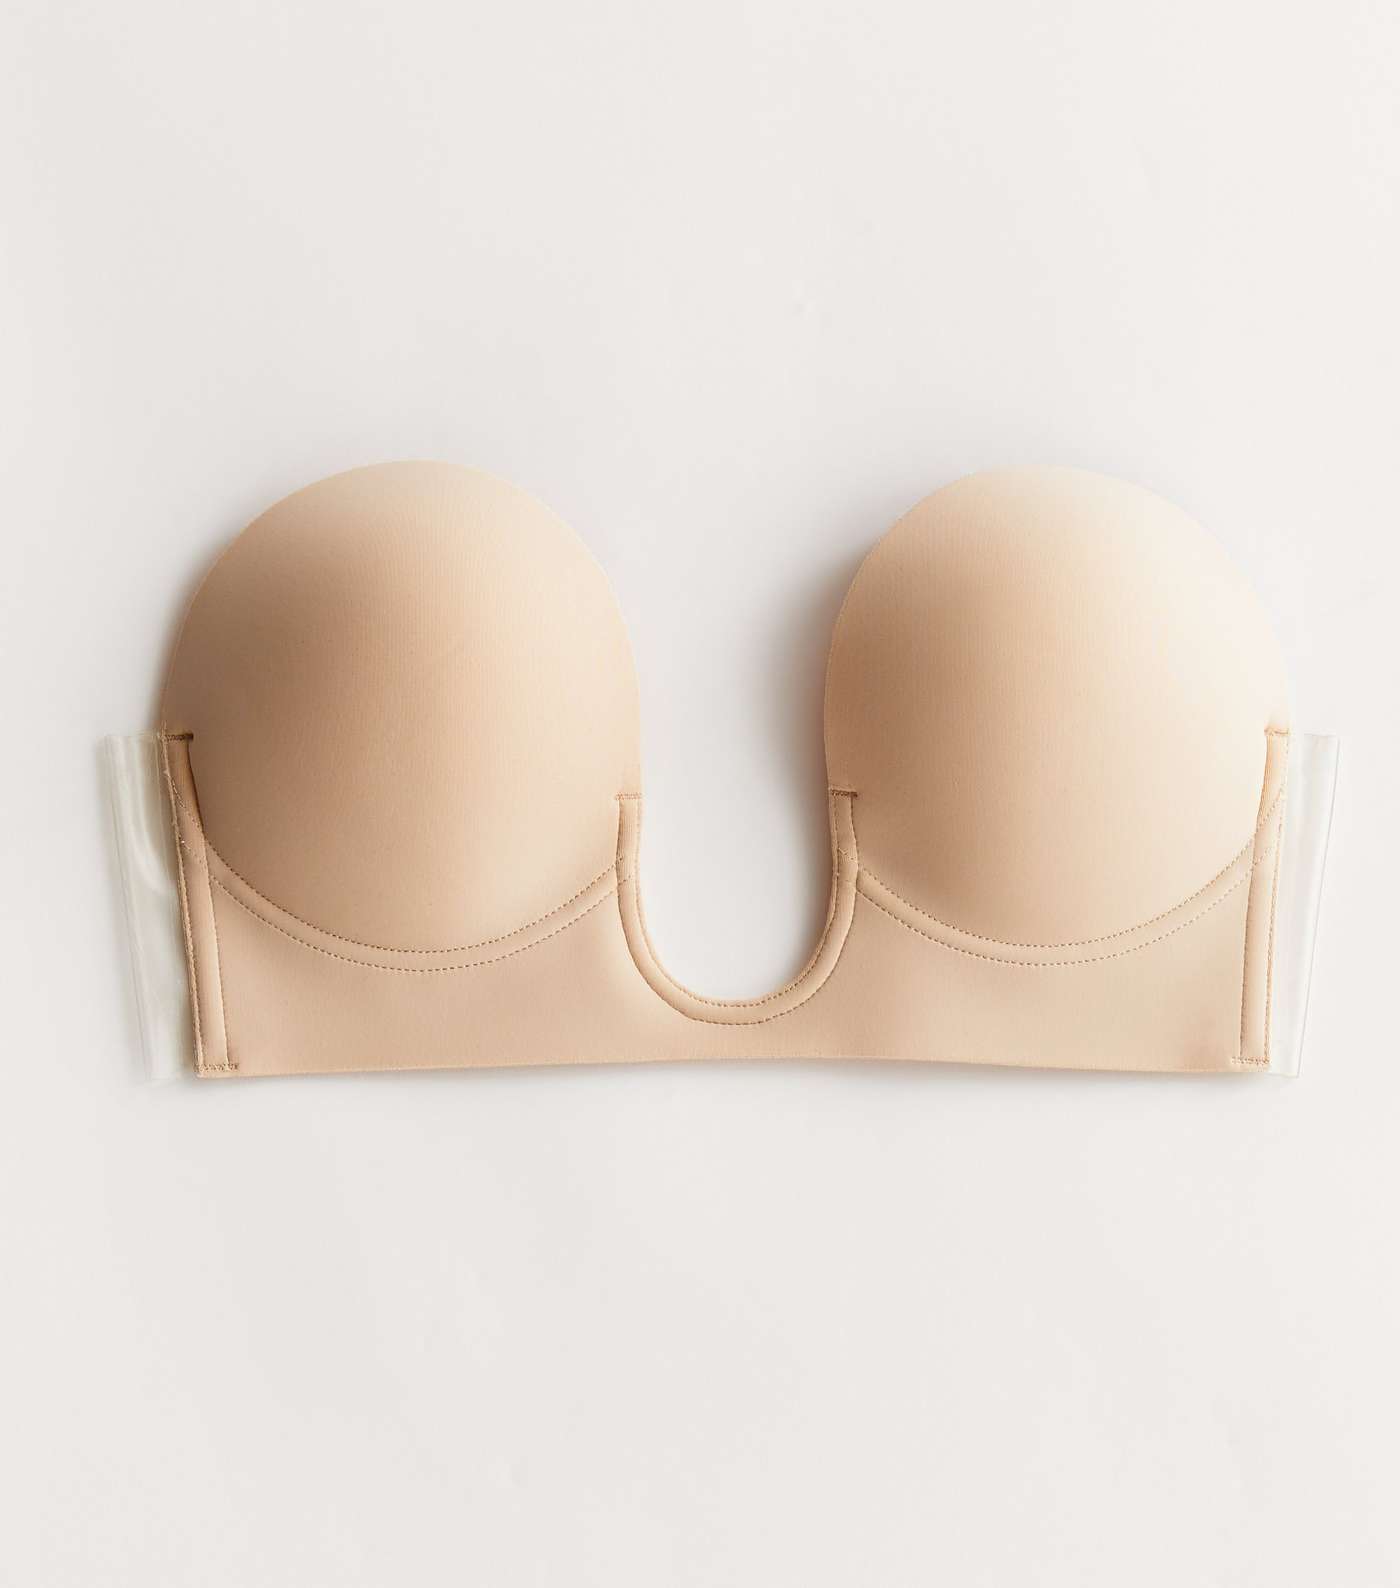 Perfection Beauty Stone C Cup Plunge Stick On Bra Image 5